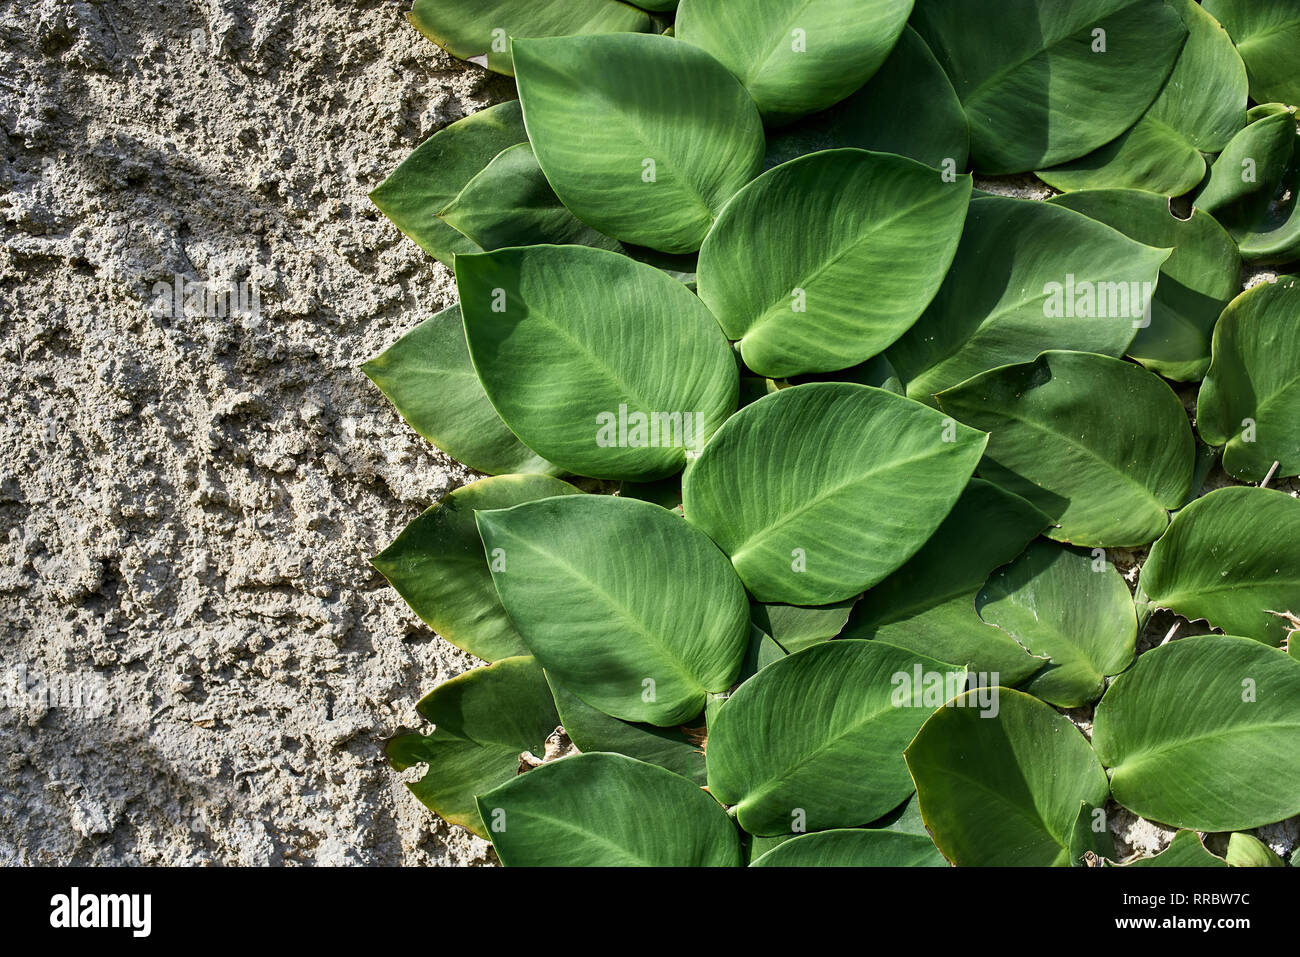 Creeper plant with green leaves on the textured wall outdoors. Sun shines onto them. Closeup horizontal photo. Stock Photo